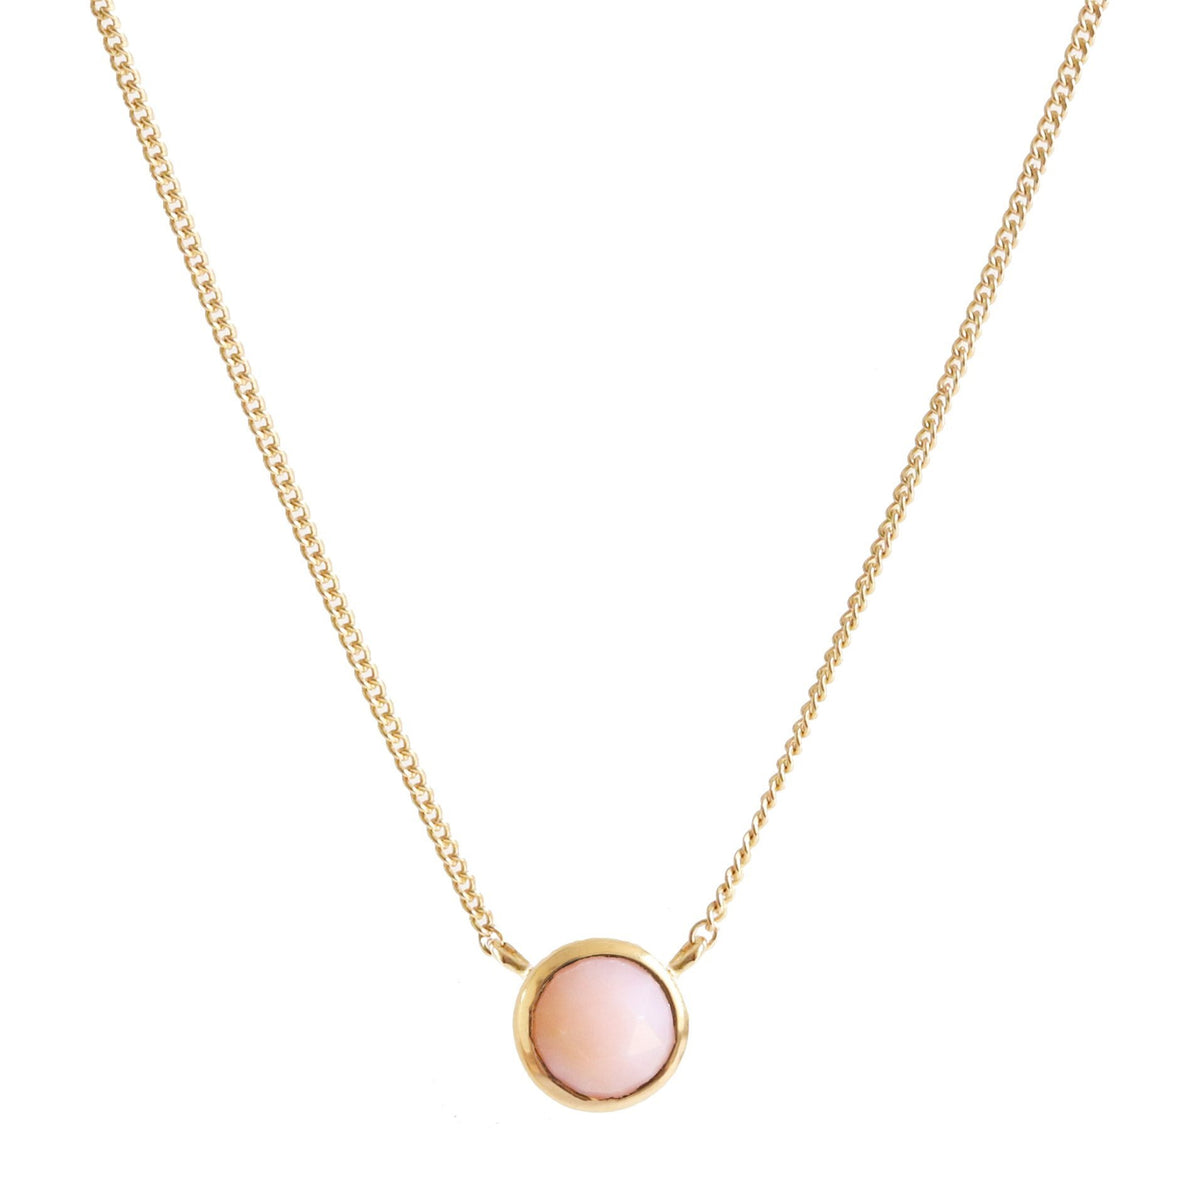 DAINTY LEGACY NECKLACE - PINK OPAL &amp; GOLD - SO PRETTY CARA COTTER